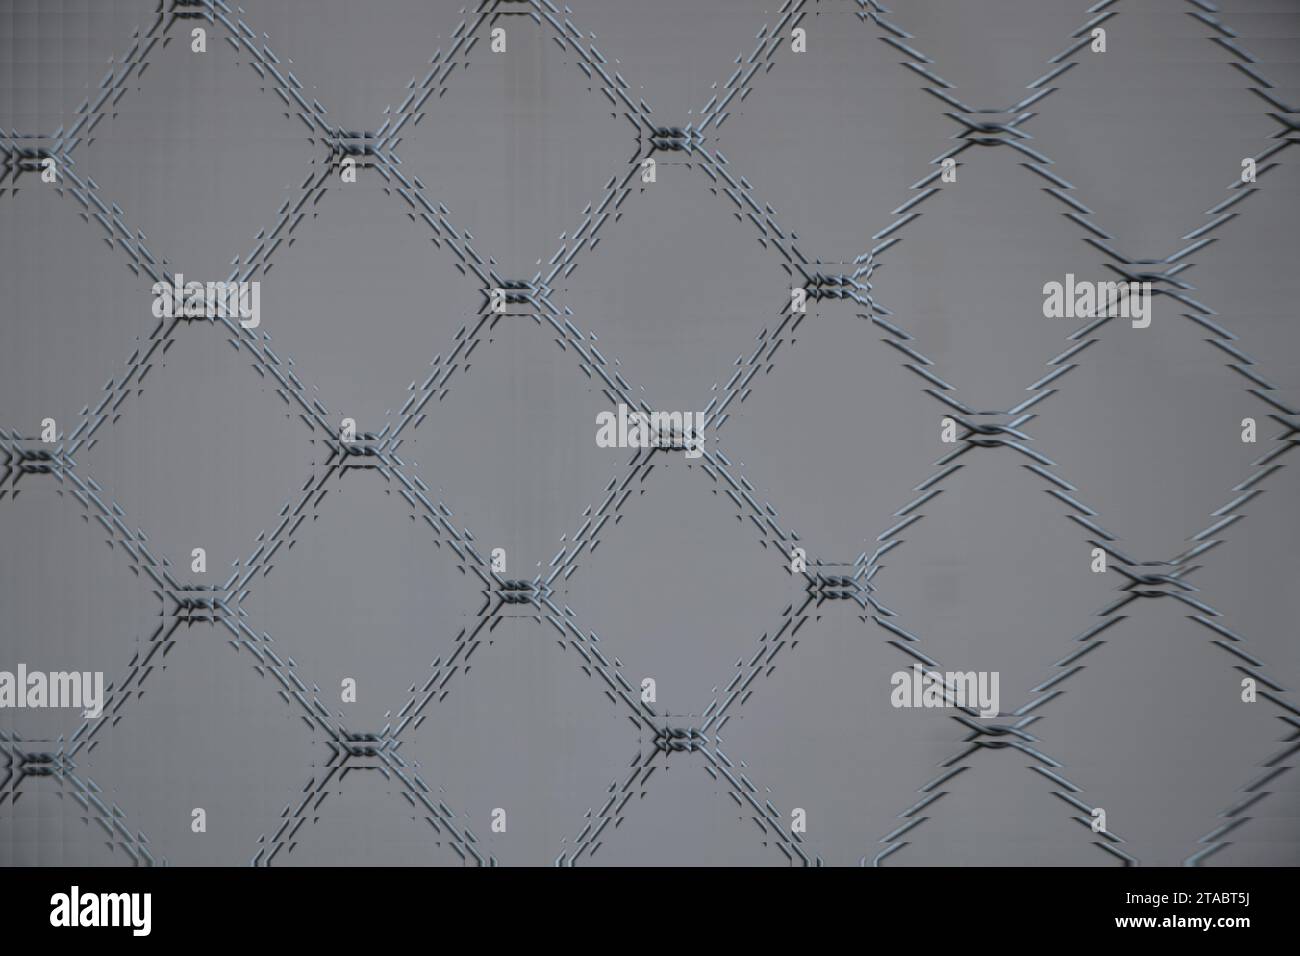 The abstract pattern background resembles a glass prism processed from a barbed wire fence image. Stock Photo